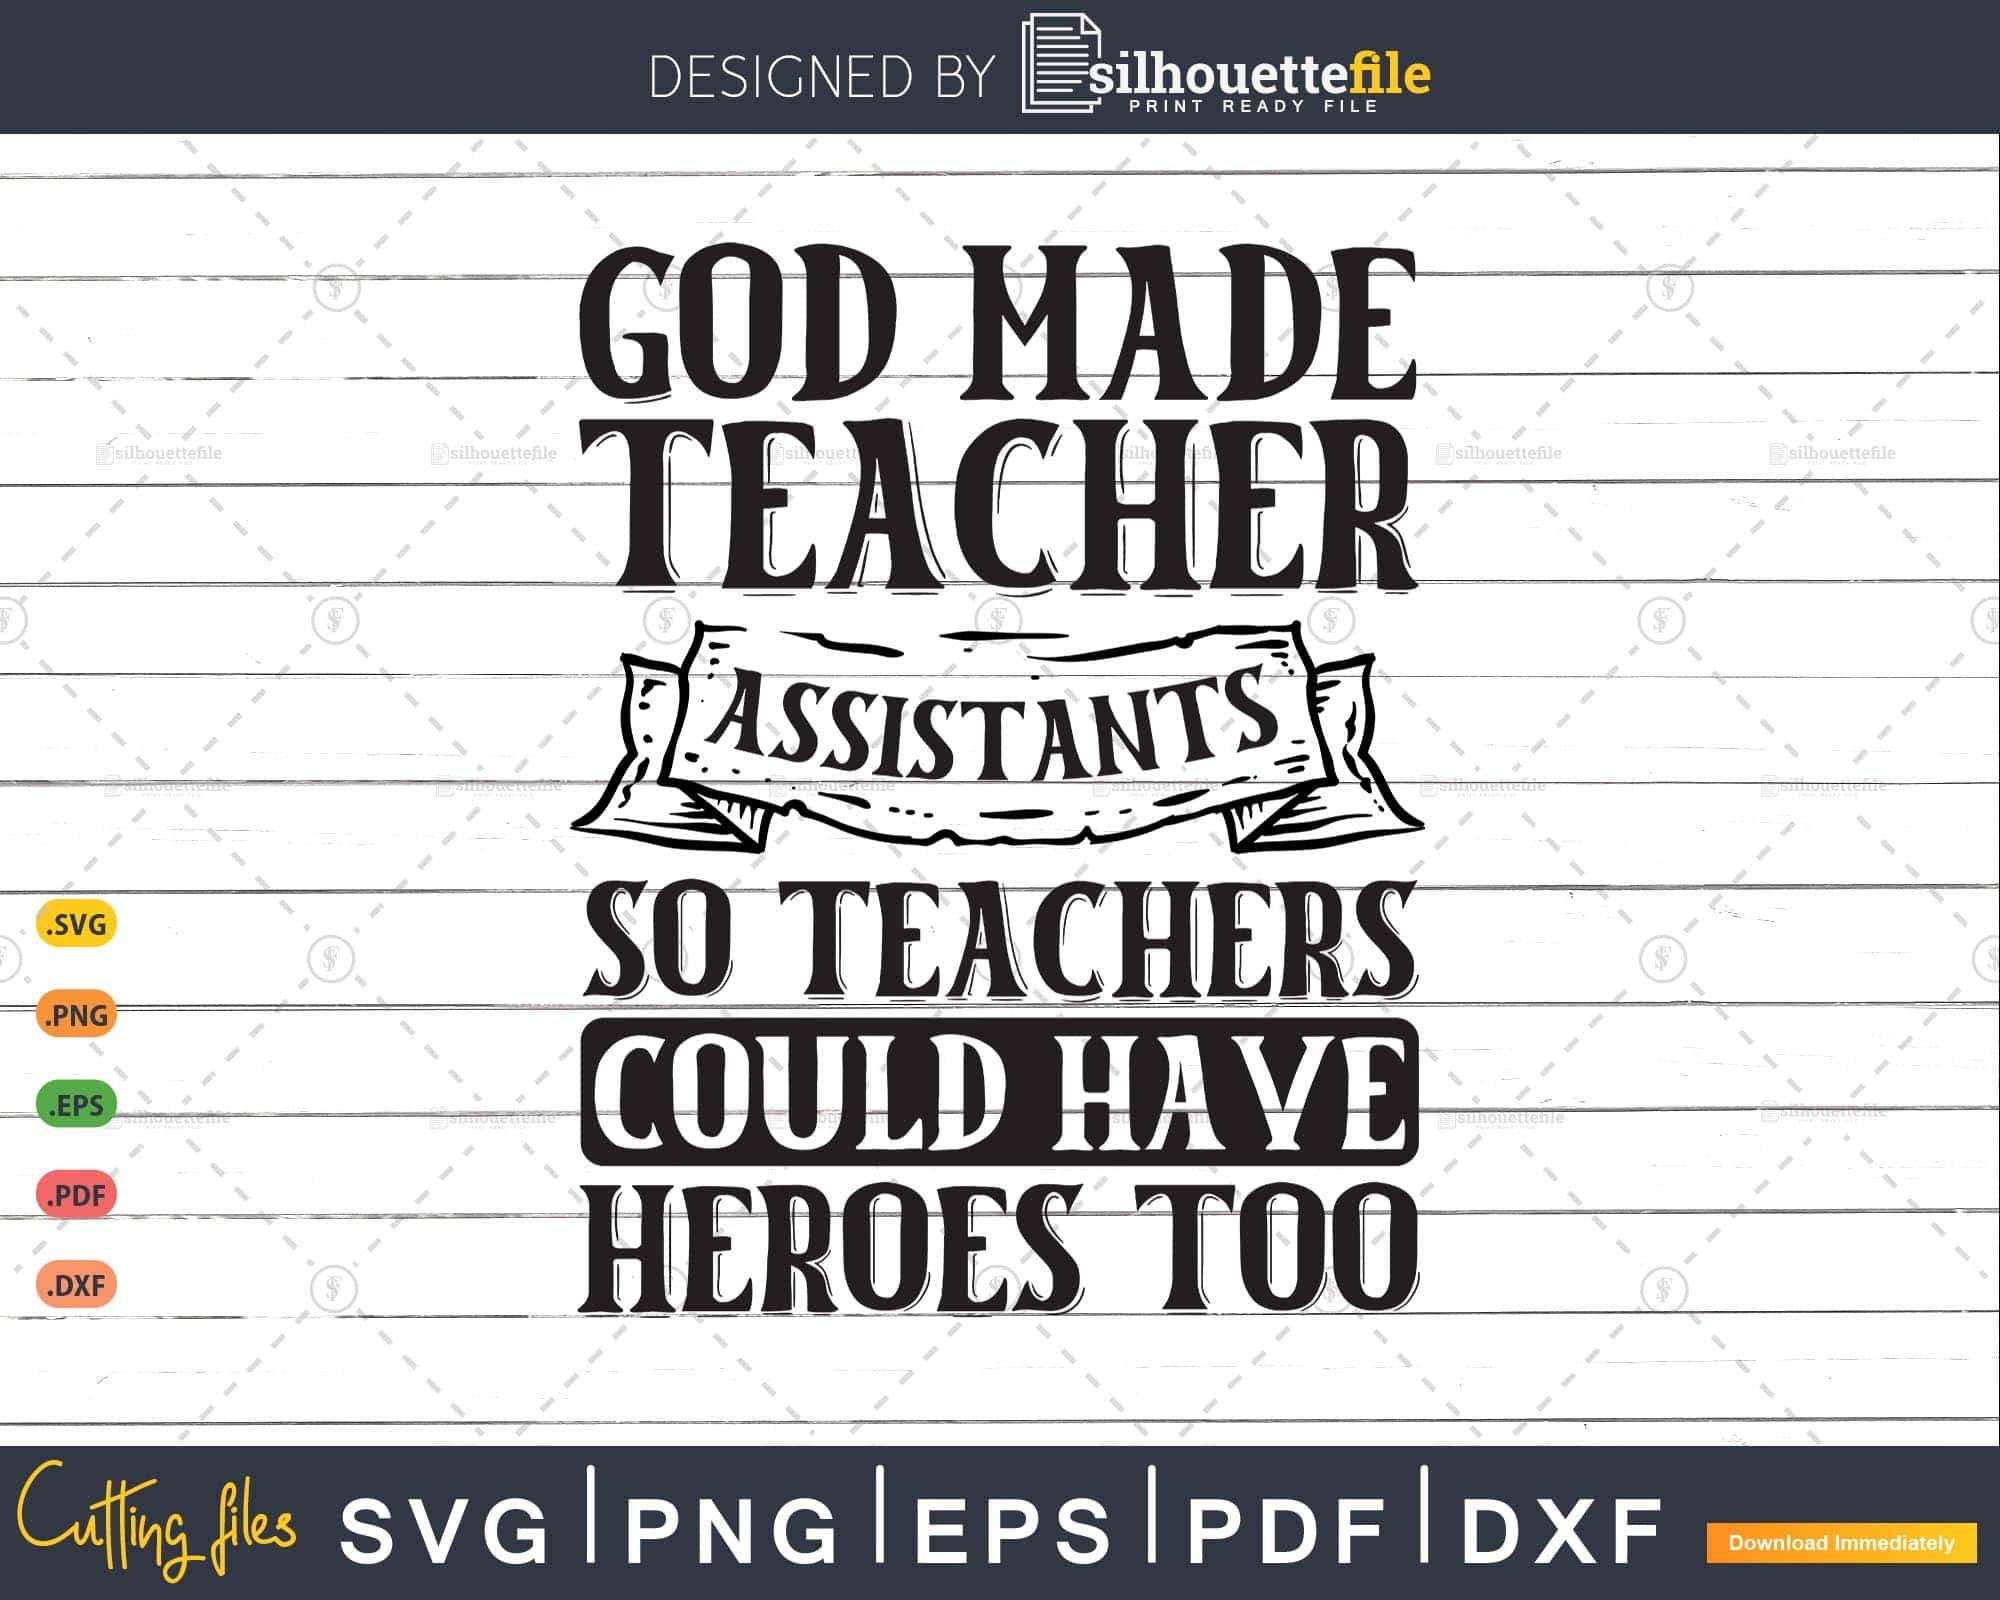 God Made Teacher Assistants So Teachers Could Have Heroes Too Svg File Silhouettefile 